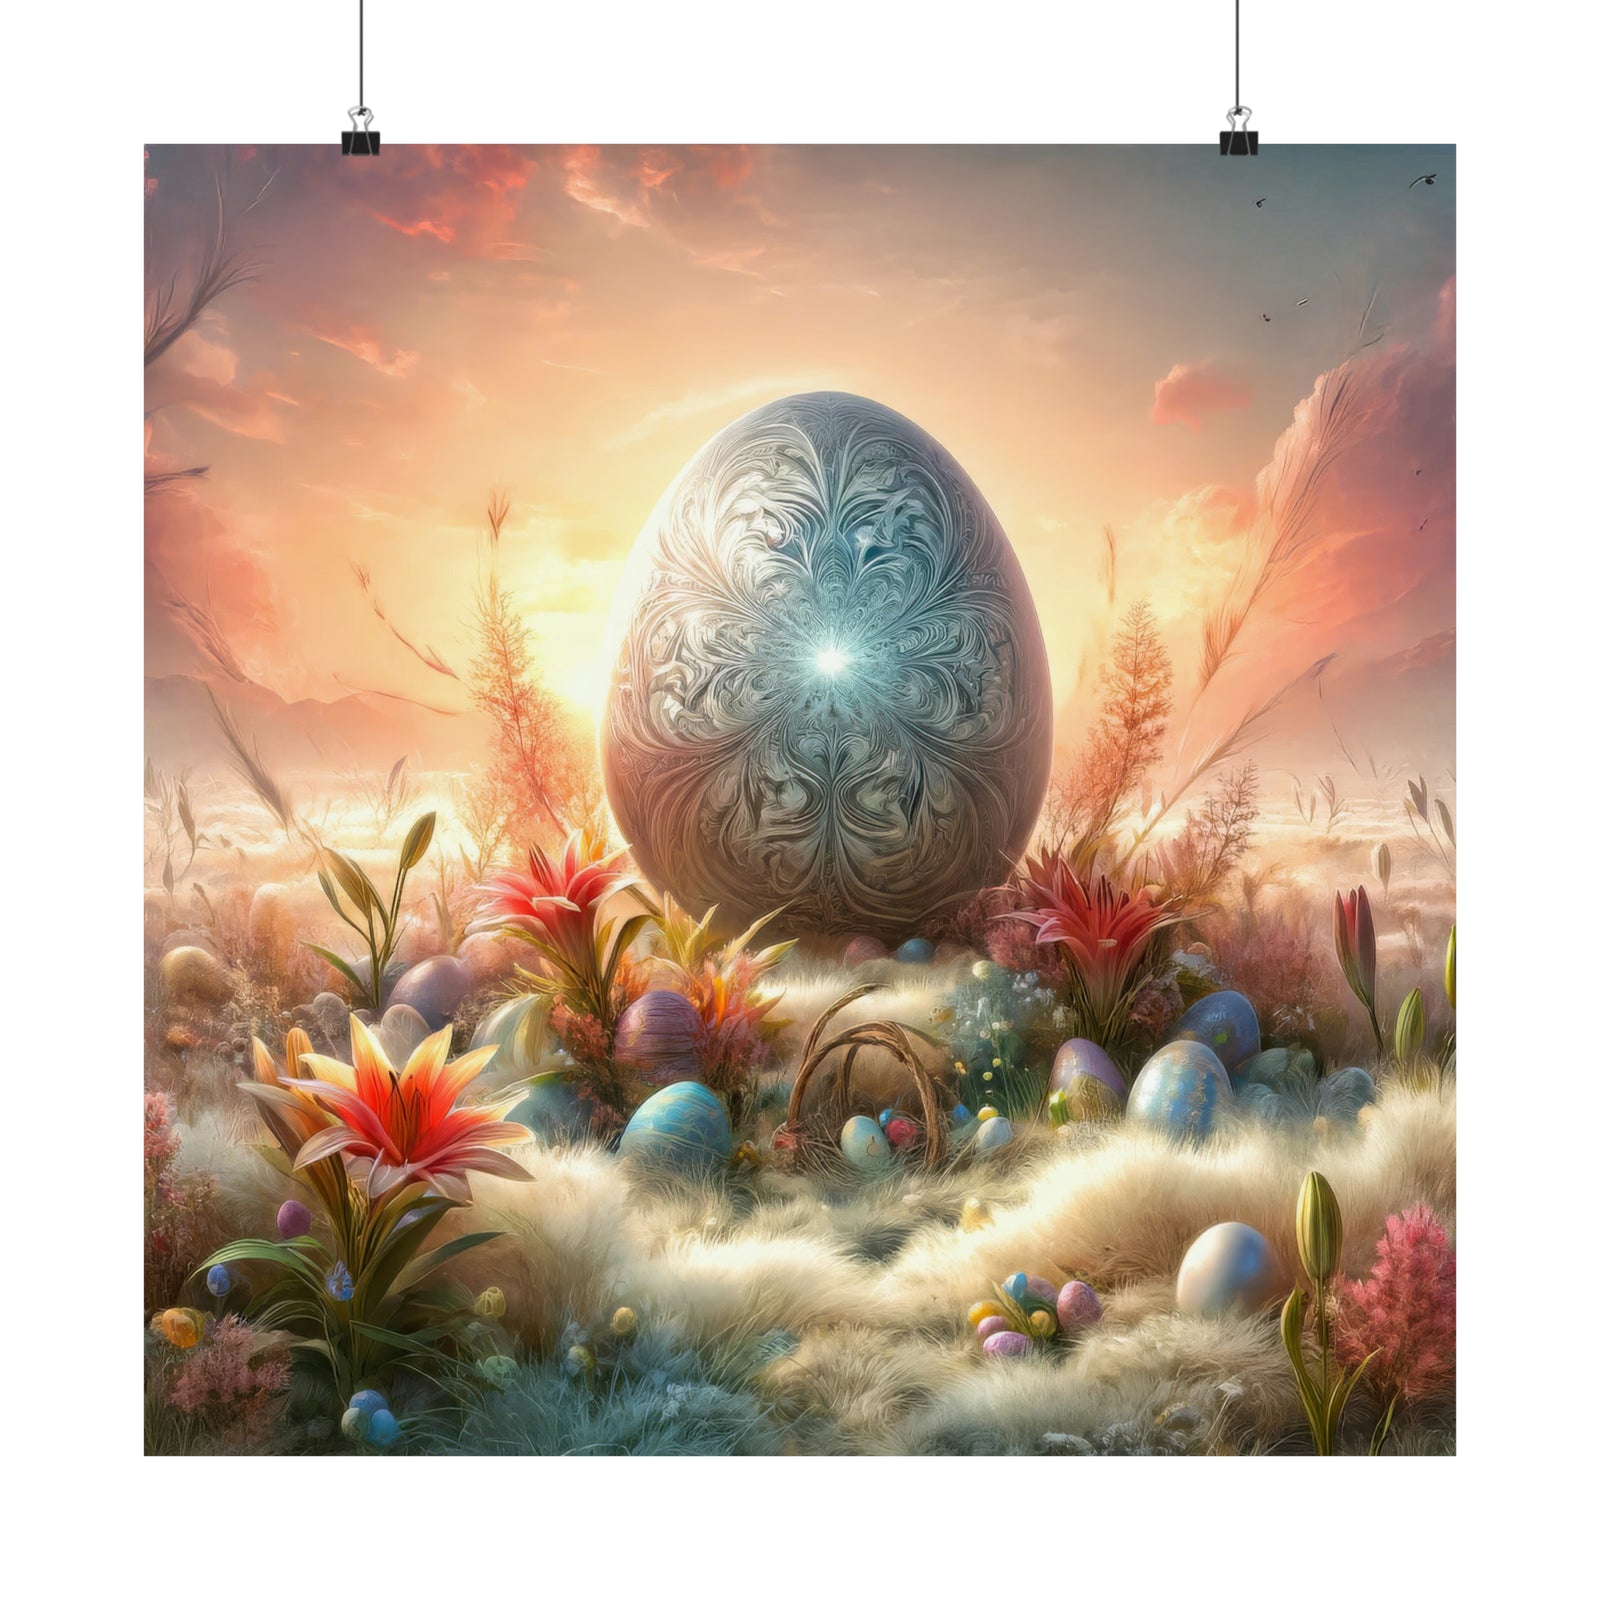 The Ornate Sentinel of Spring's Bounty Poster